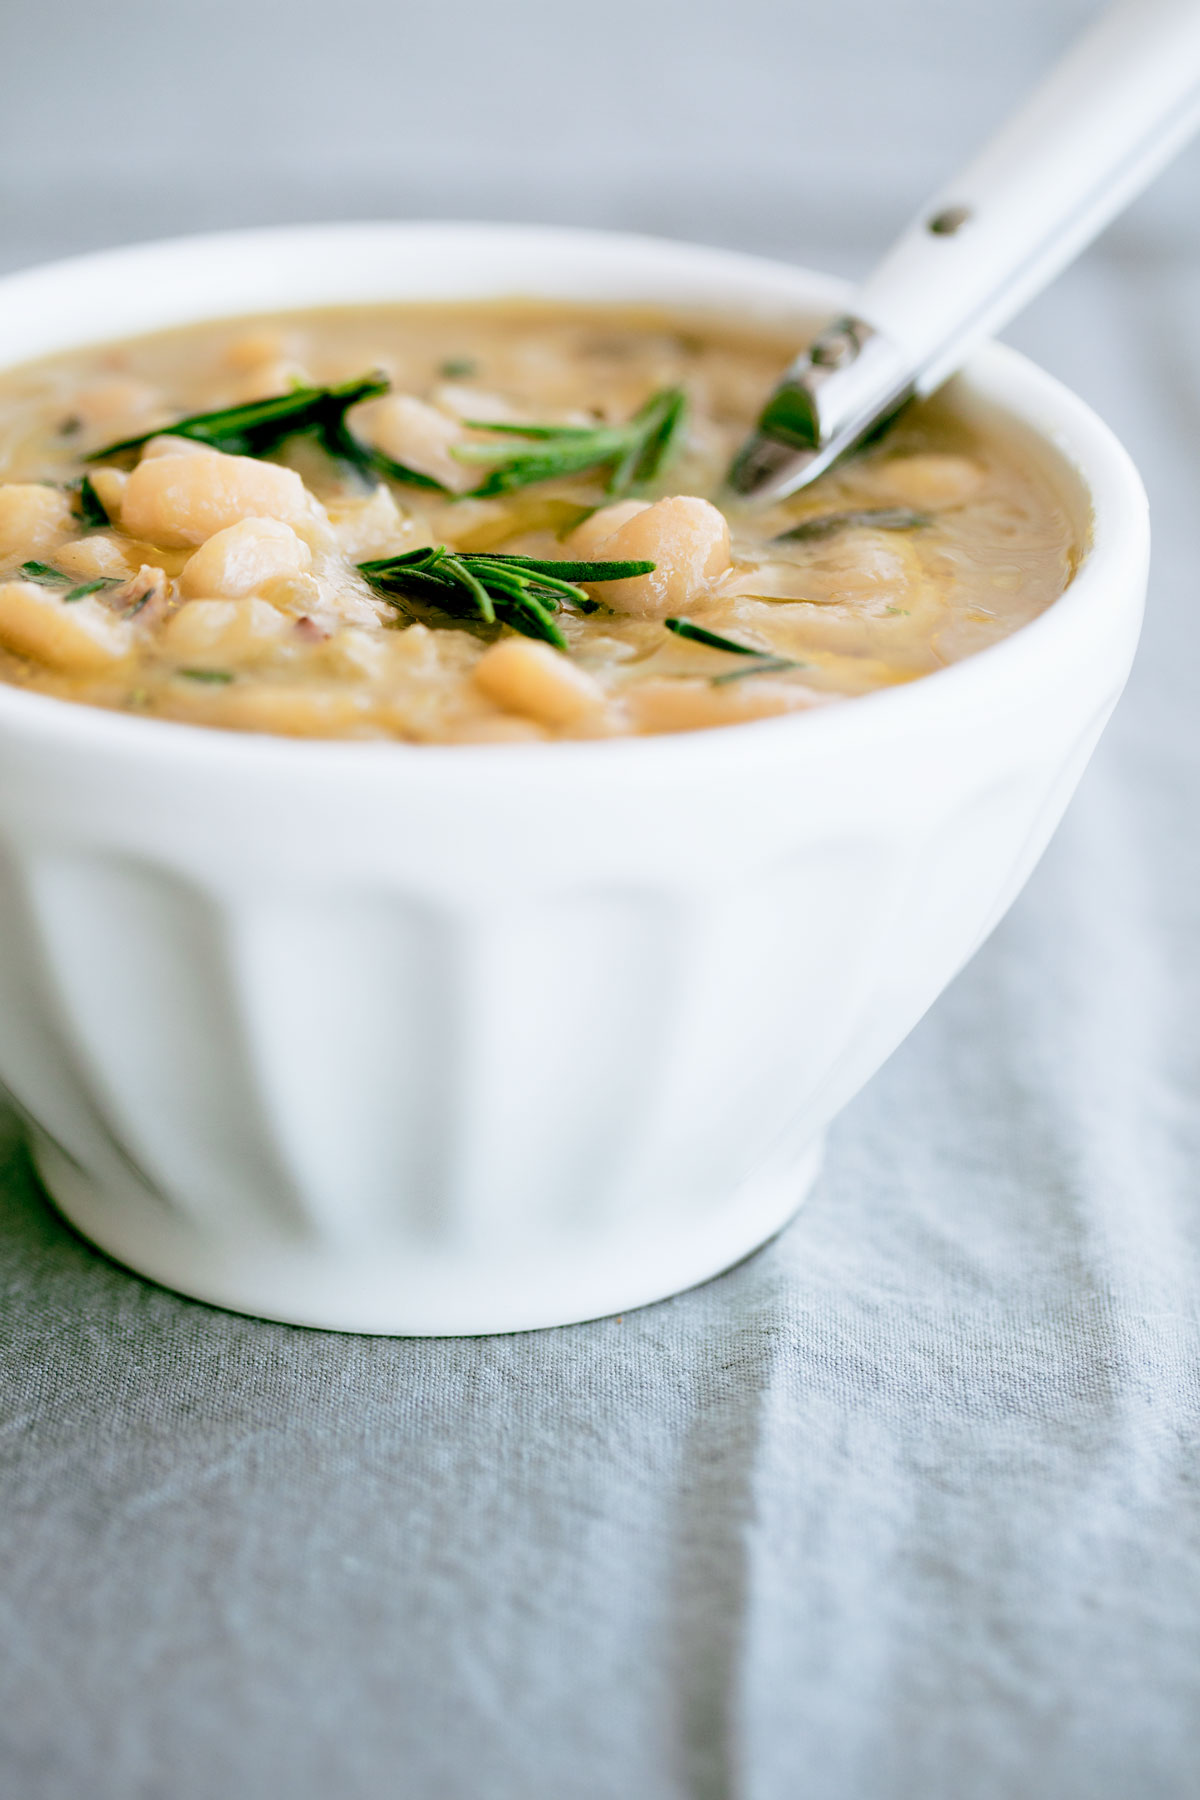 Healthy Winter Recipes: Slow Cooker Cannellini Bean Soup